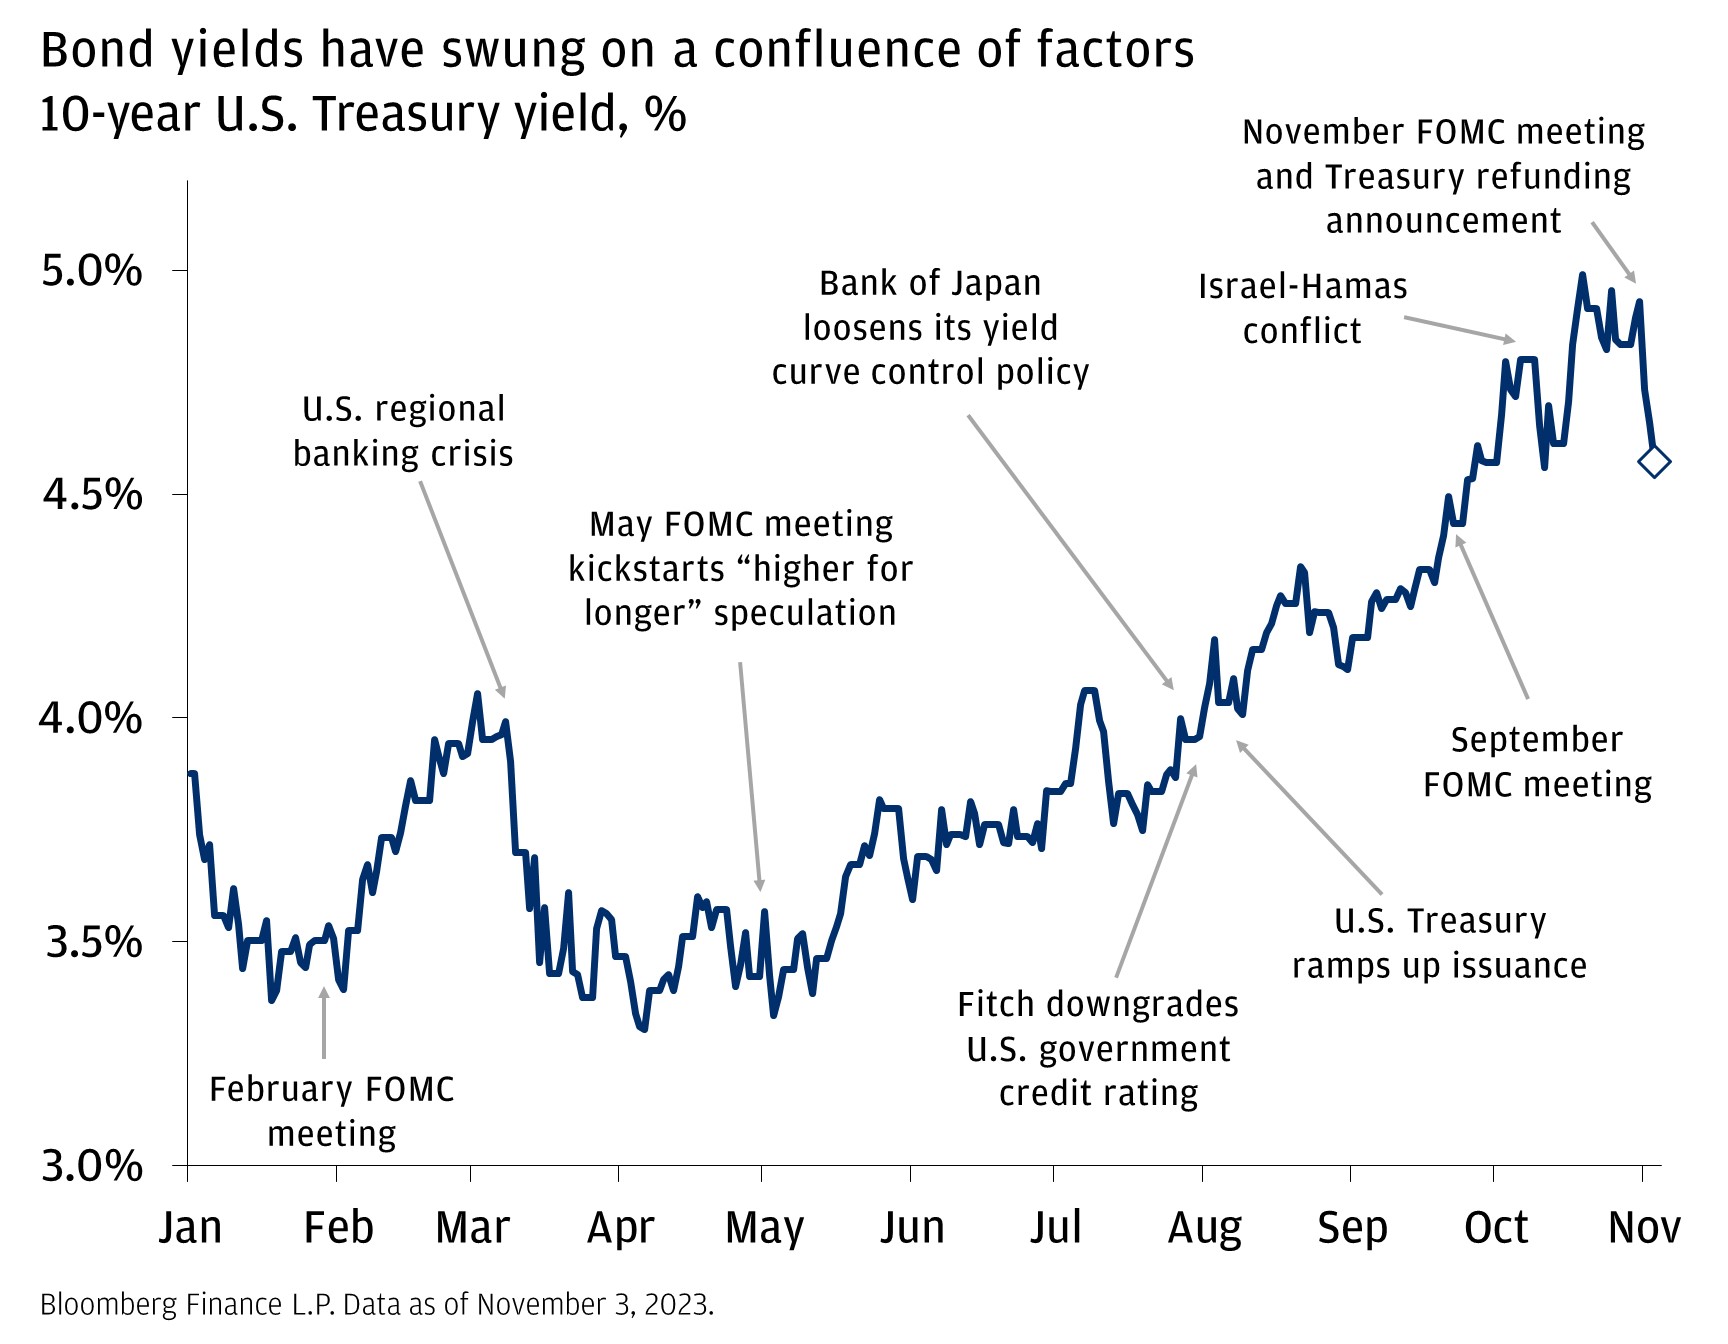 Bond yields have swung on a confluence of factors